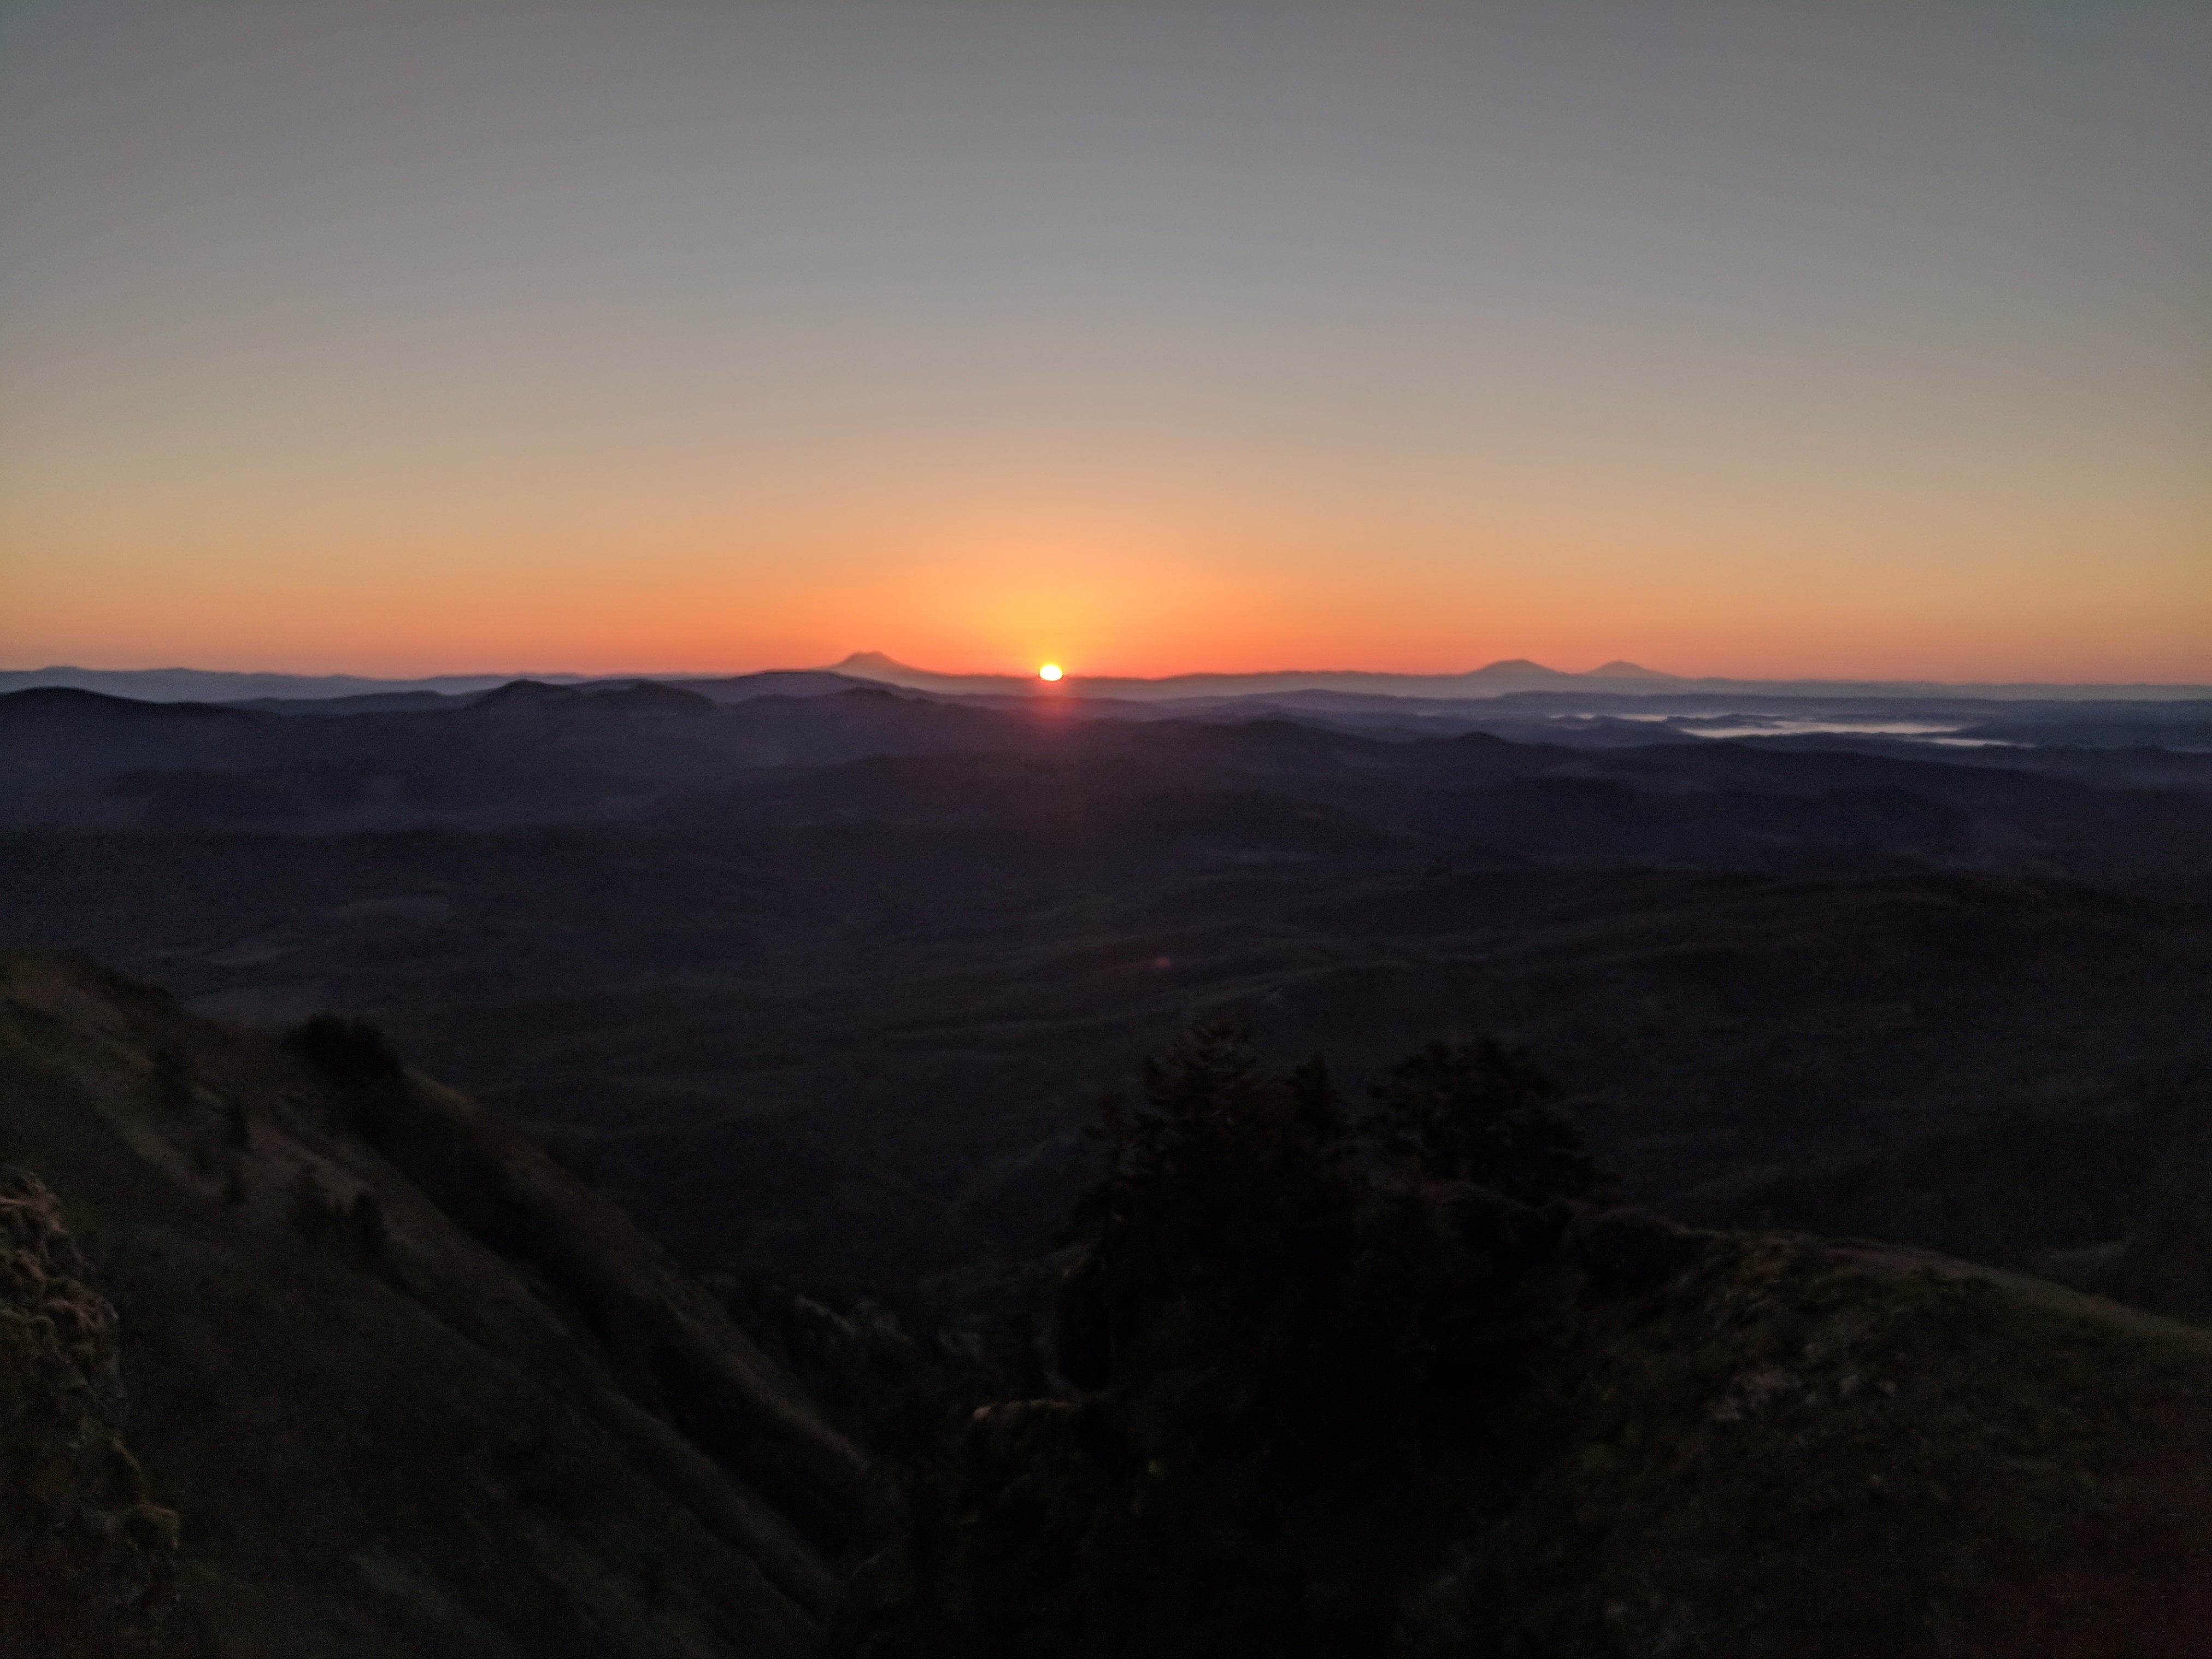 Sunrise from the top of saddle mountain